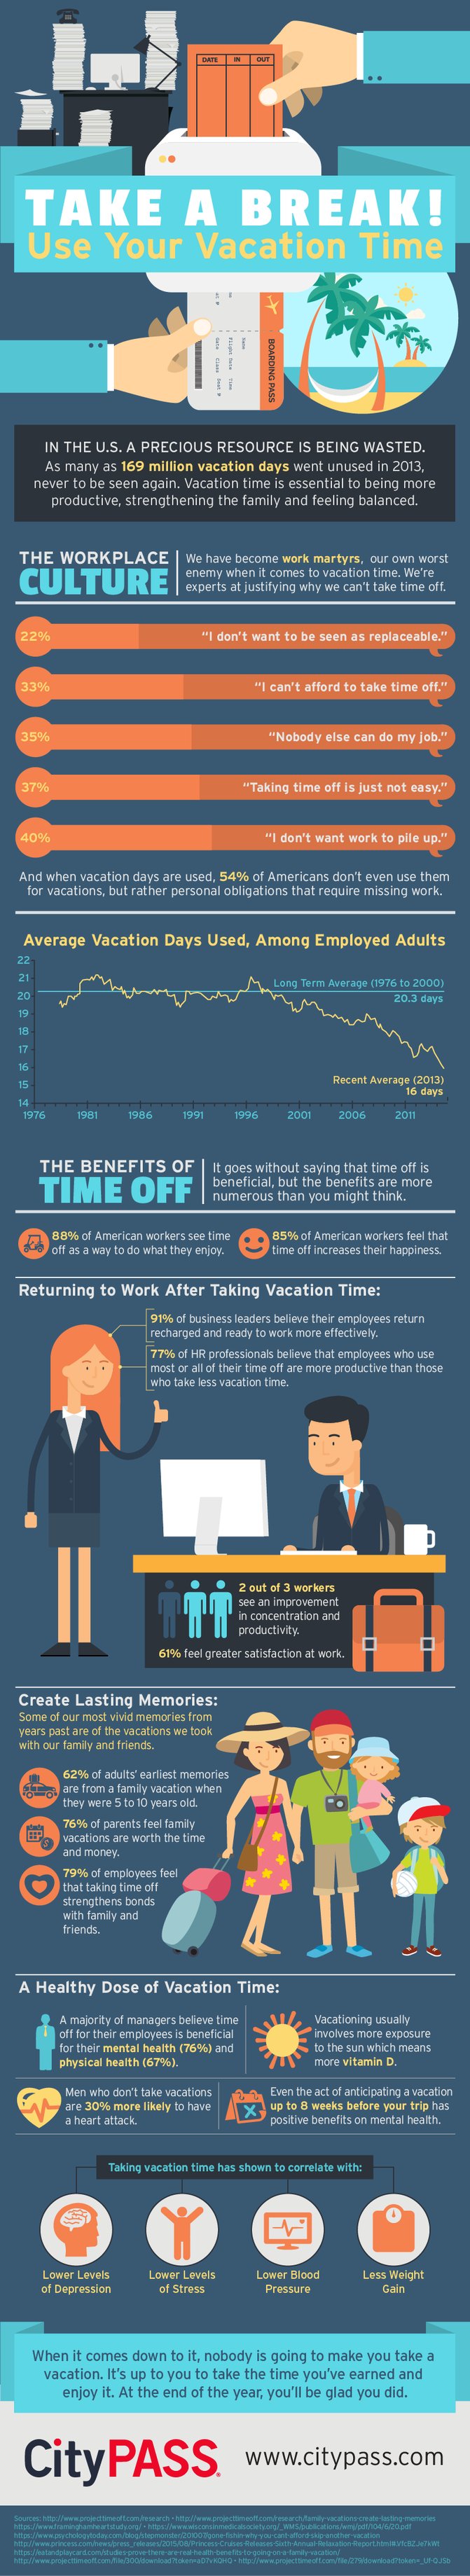 use-vacation-time-infographic.png